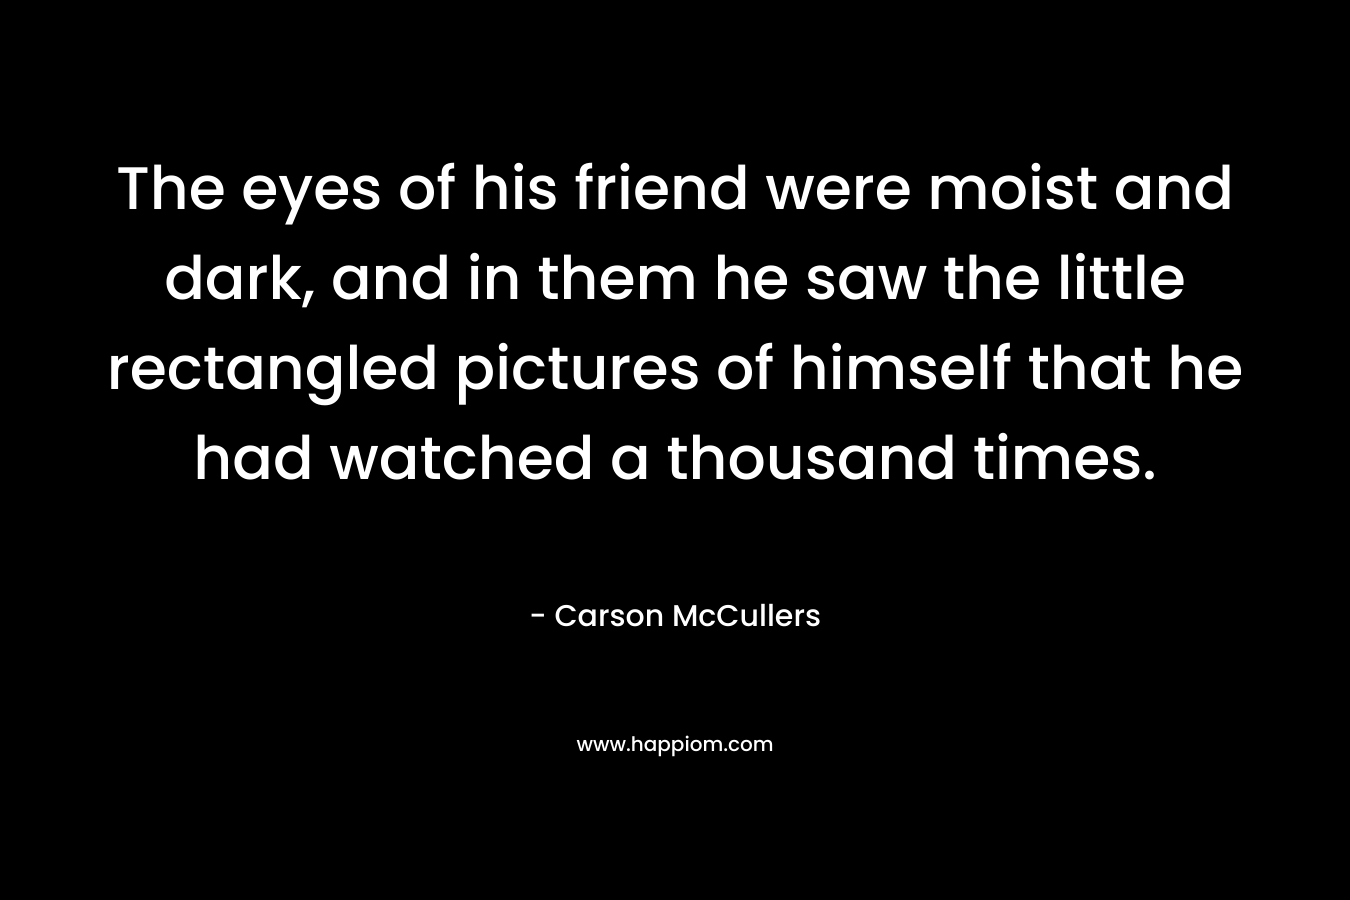 The eyes of his friend were moist and dark, and in them he saw the little rectangled pictures of himself that he had watched a thousand times. – Carson McCullers